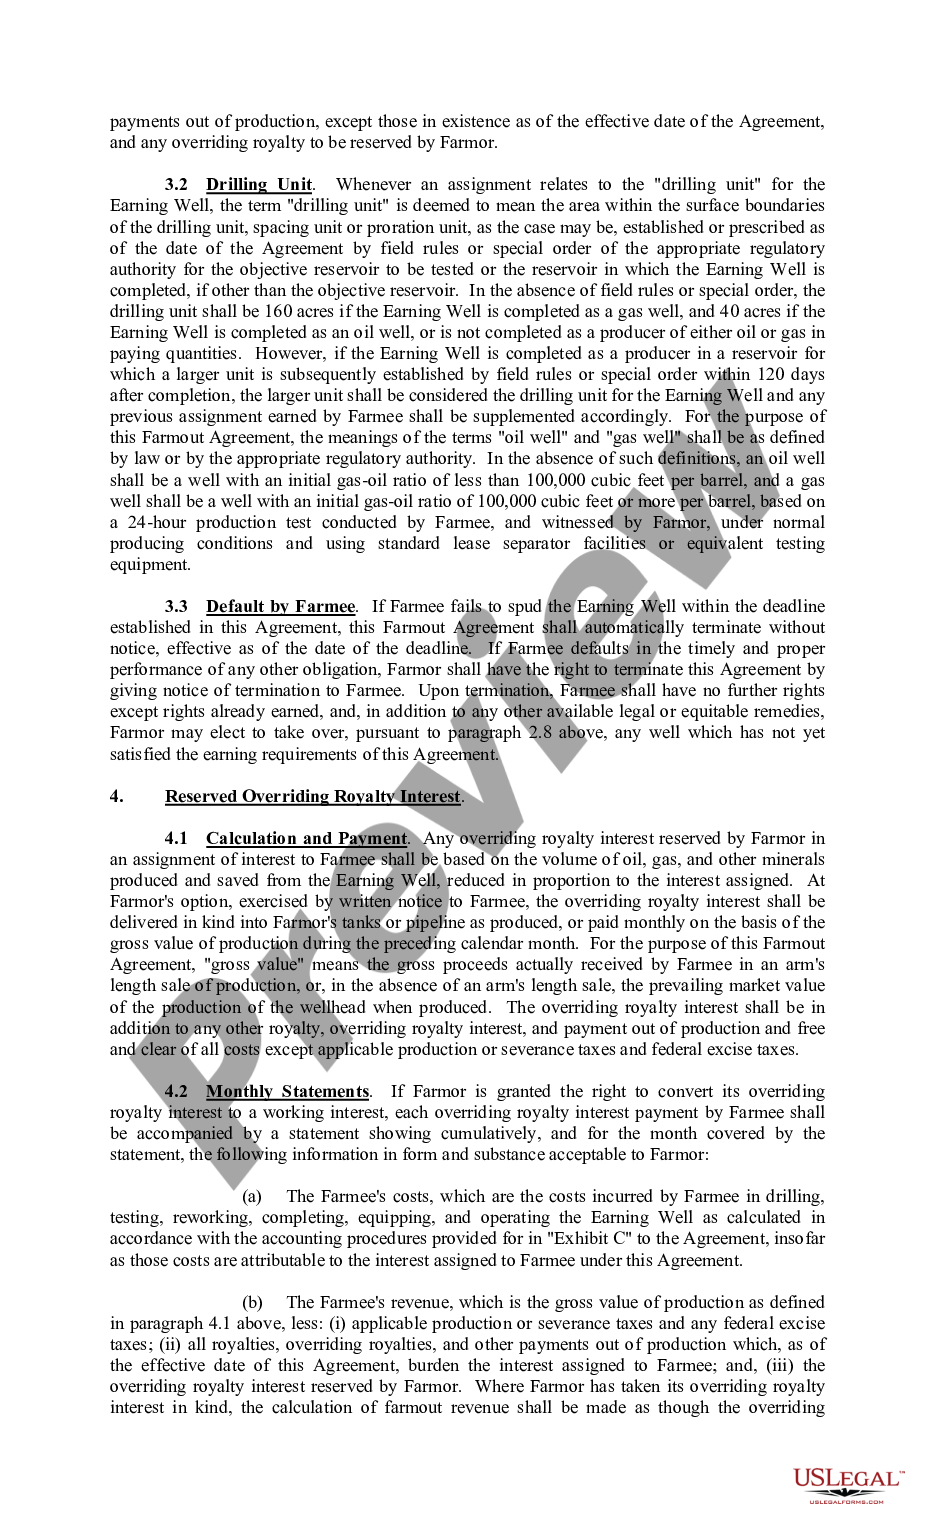 page 9 Farmout Agreement Providing For Multiple Wells with Production Required to Earn An Assignment preview